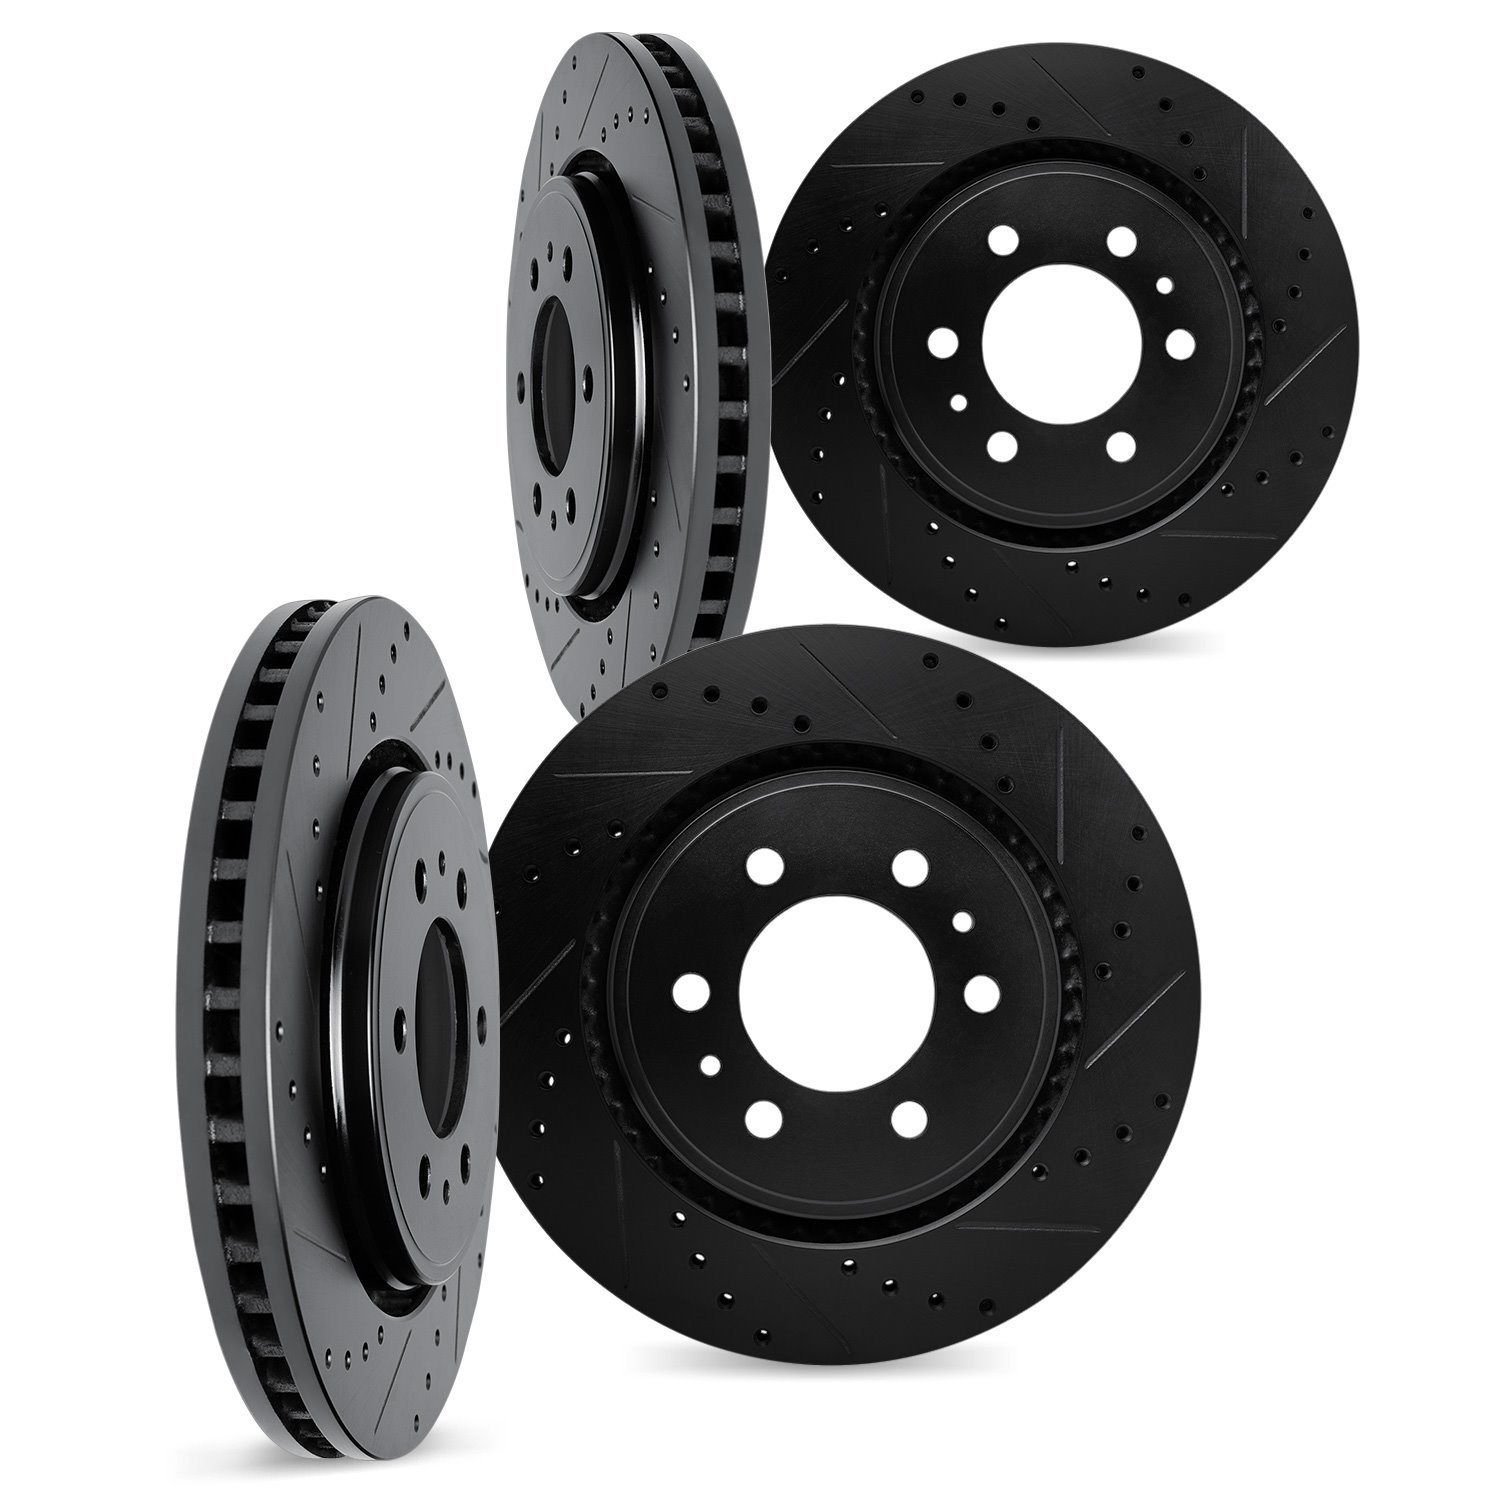 8004-54151 Drilled/Slotted Brake Rotors [Black], 2009-2009 Ford/Lincoln/Mercury/Mazda, Position: Front and Rear